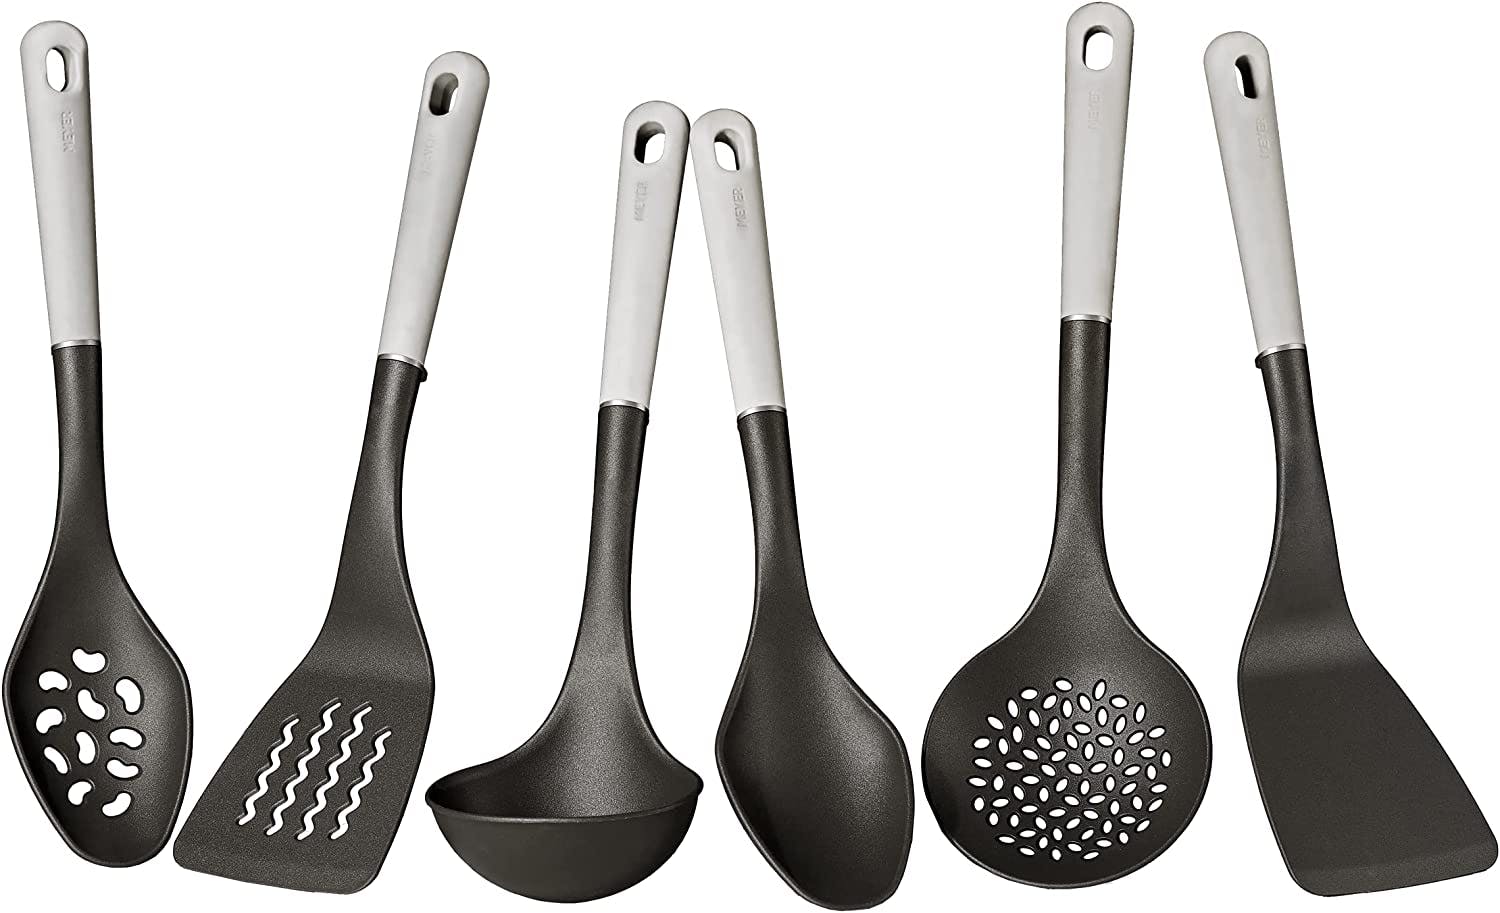 Meyer Everyday Nylon Kitchen Cooking Utensil and Tool Set, 6-Piece, Black with Gray Handles